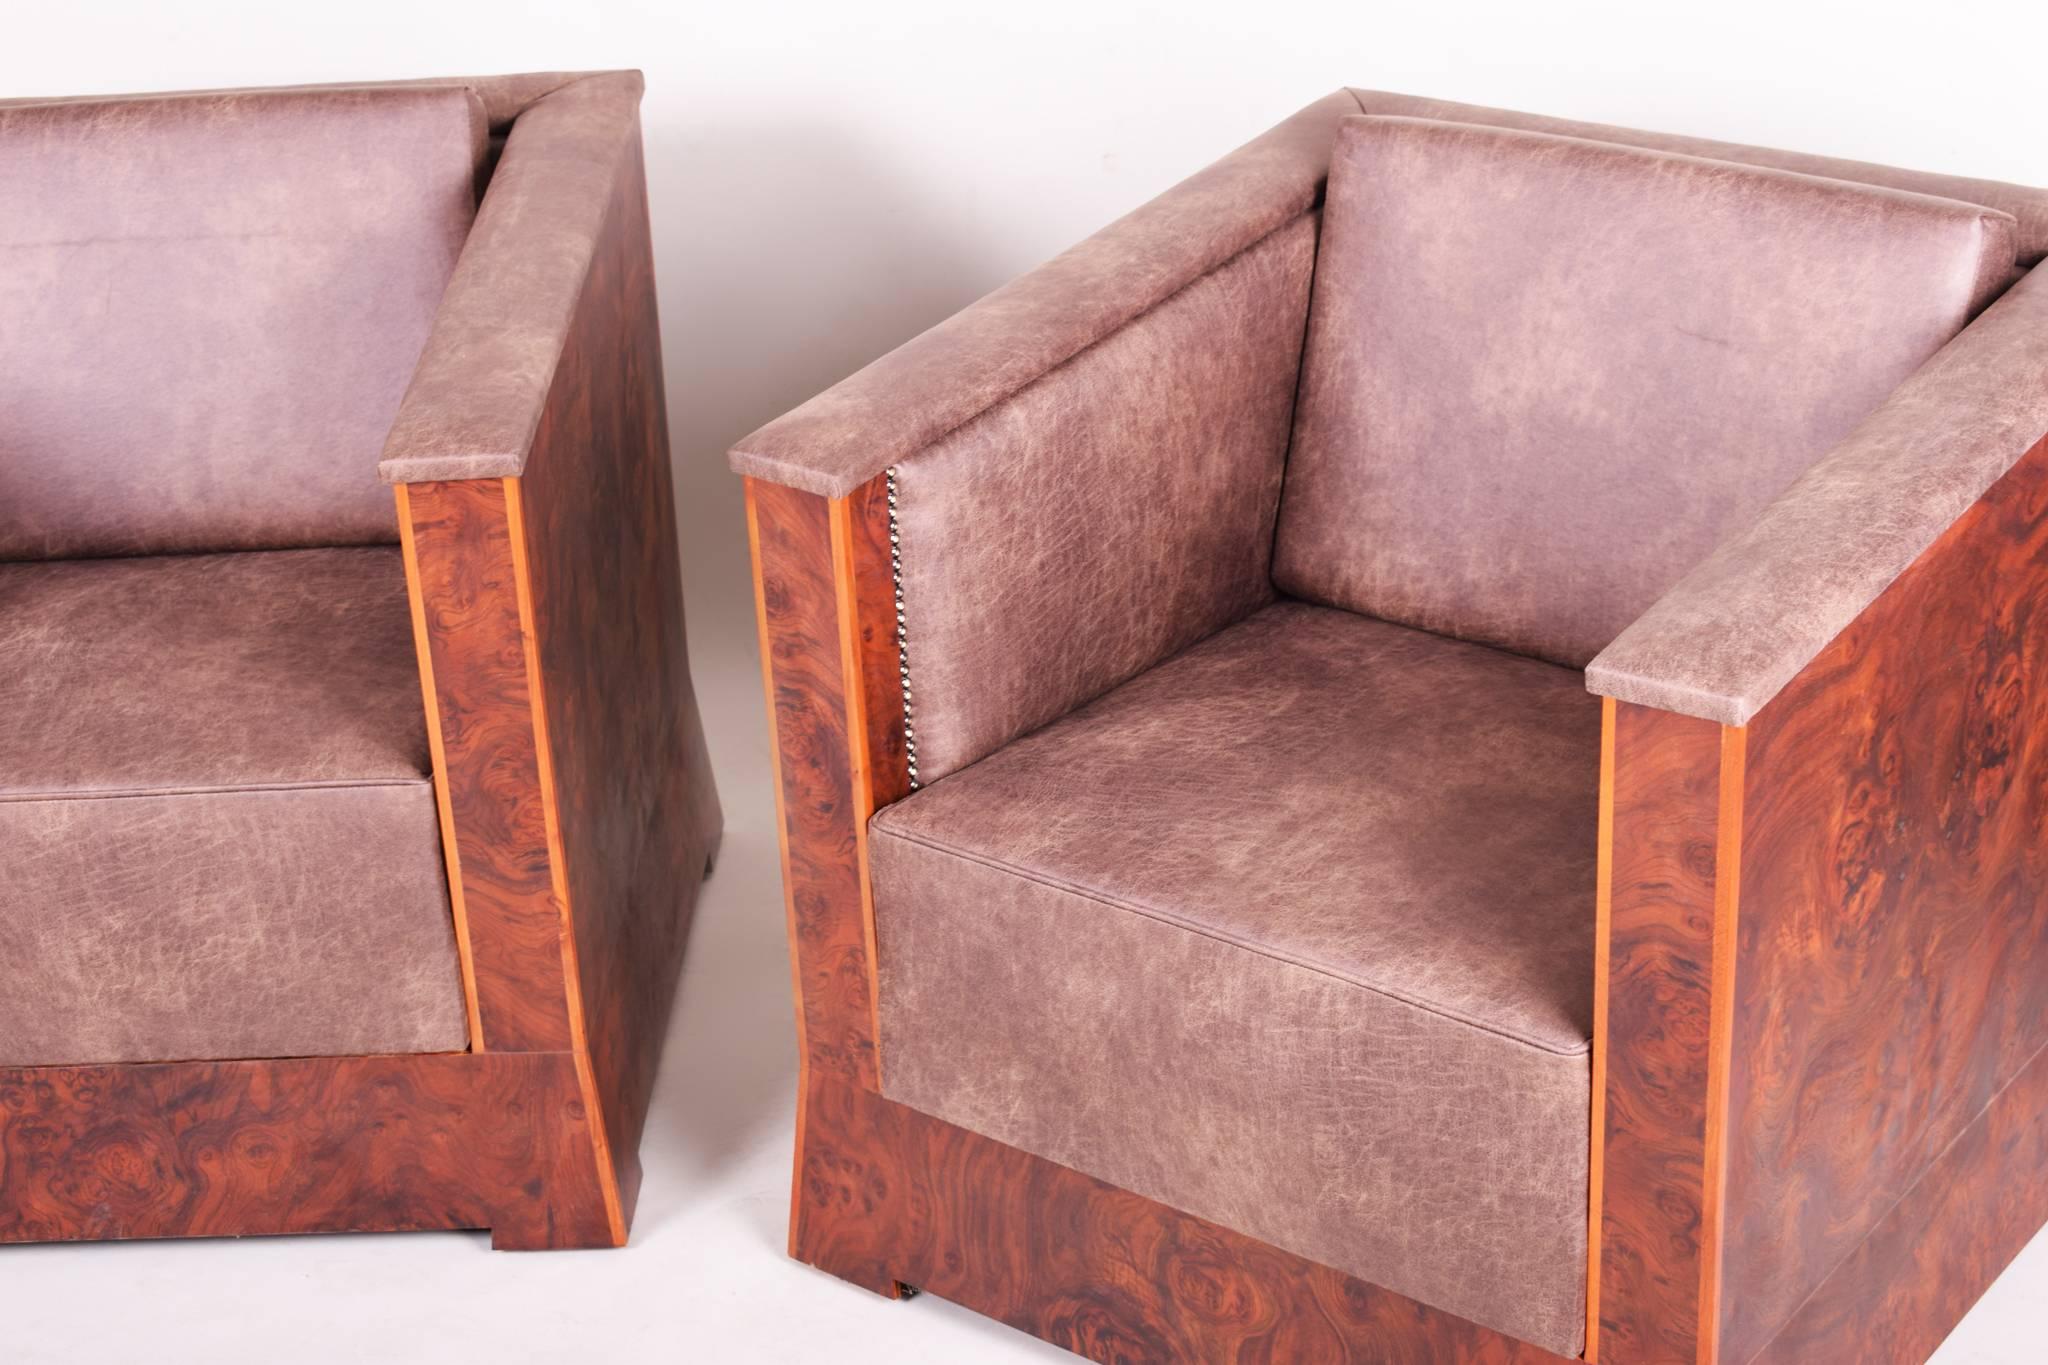 Pair of cubist armchairs.
Completely restored, surface made by Shellac politure.
 
We guarantee safe a the cheapest air transport from Europe to the whole world within 7 days.
The price is the same as for ship transport but delivery time is really